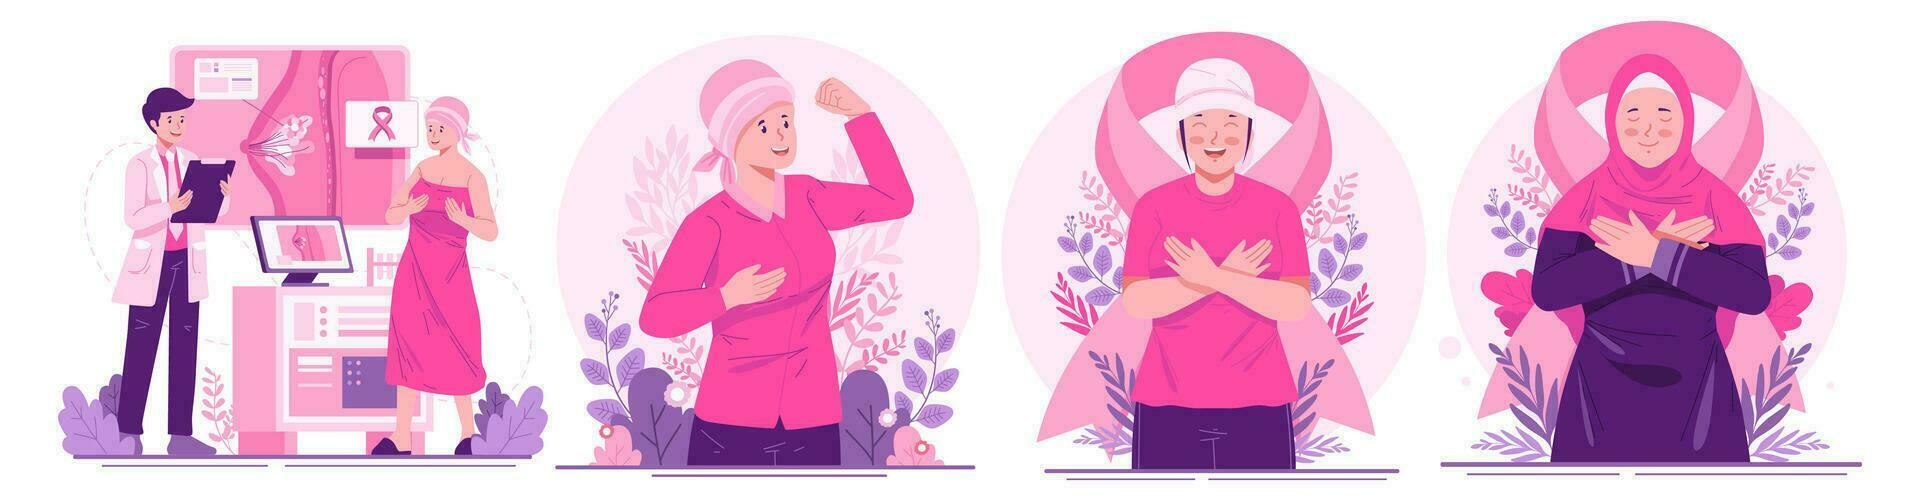 Illustration Set of Breast Cancer Awareness Month. Women With Ribbons Pink As a Concern and Support for Women With Breast Cancer vector